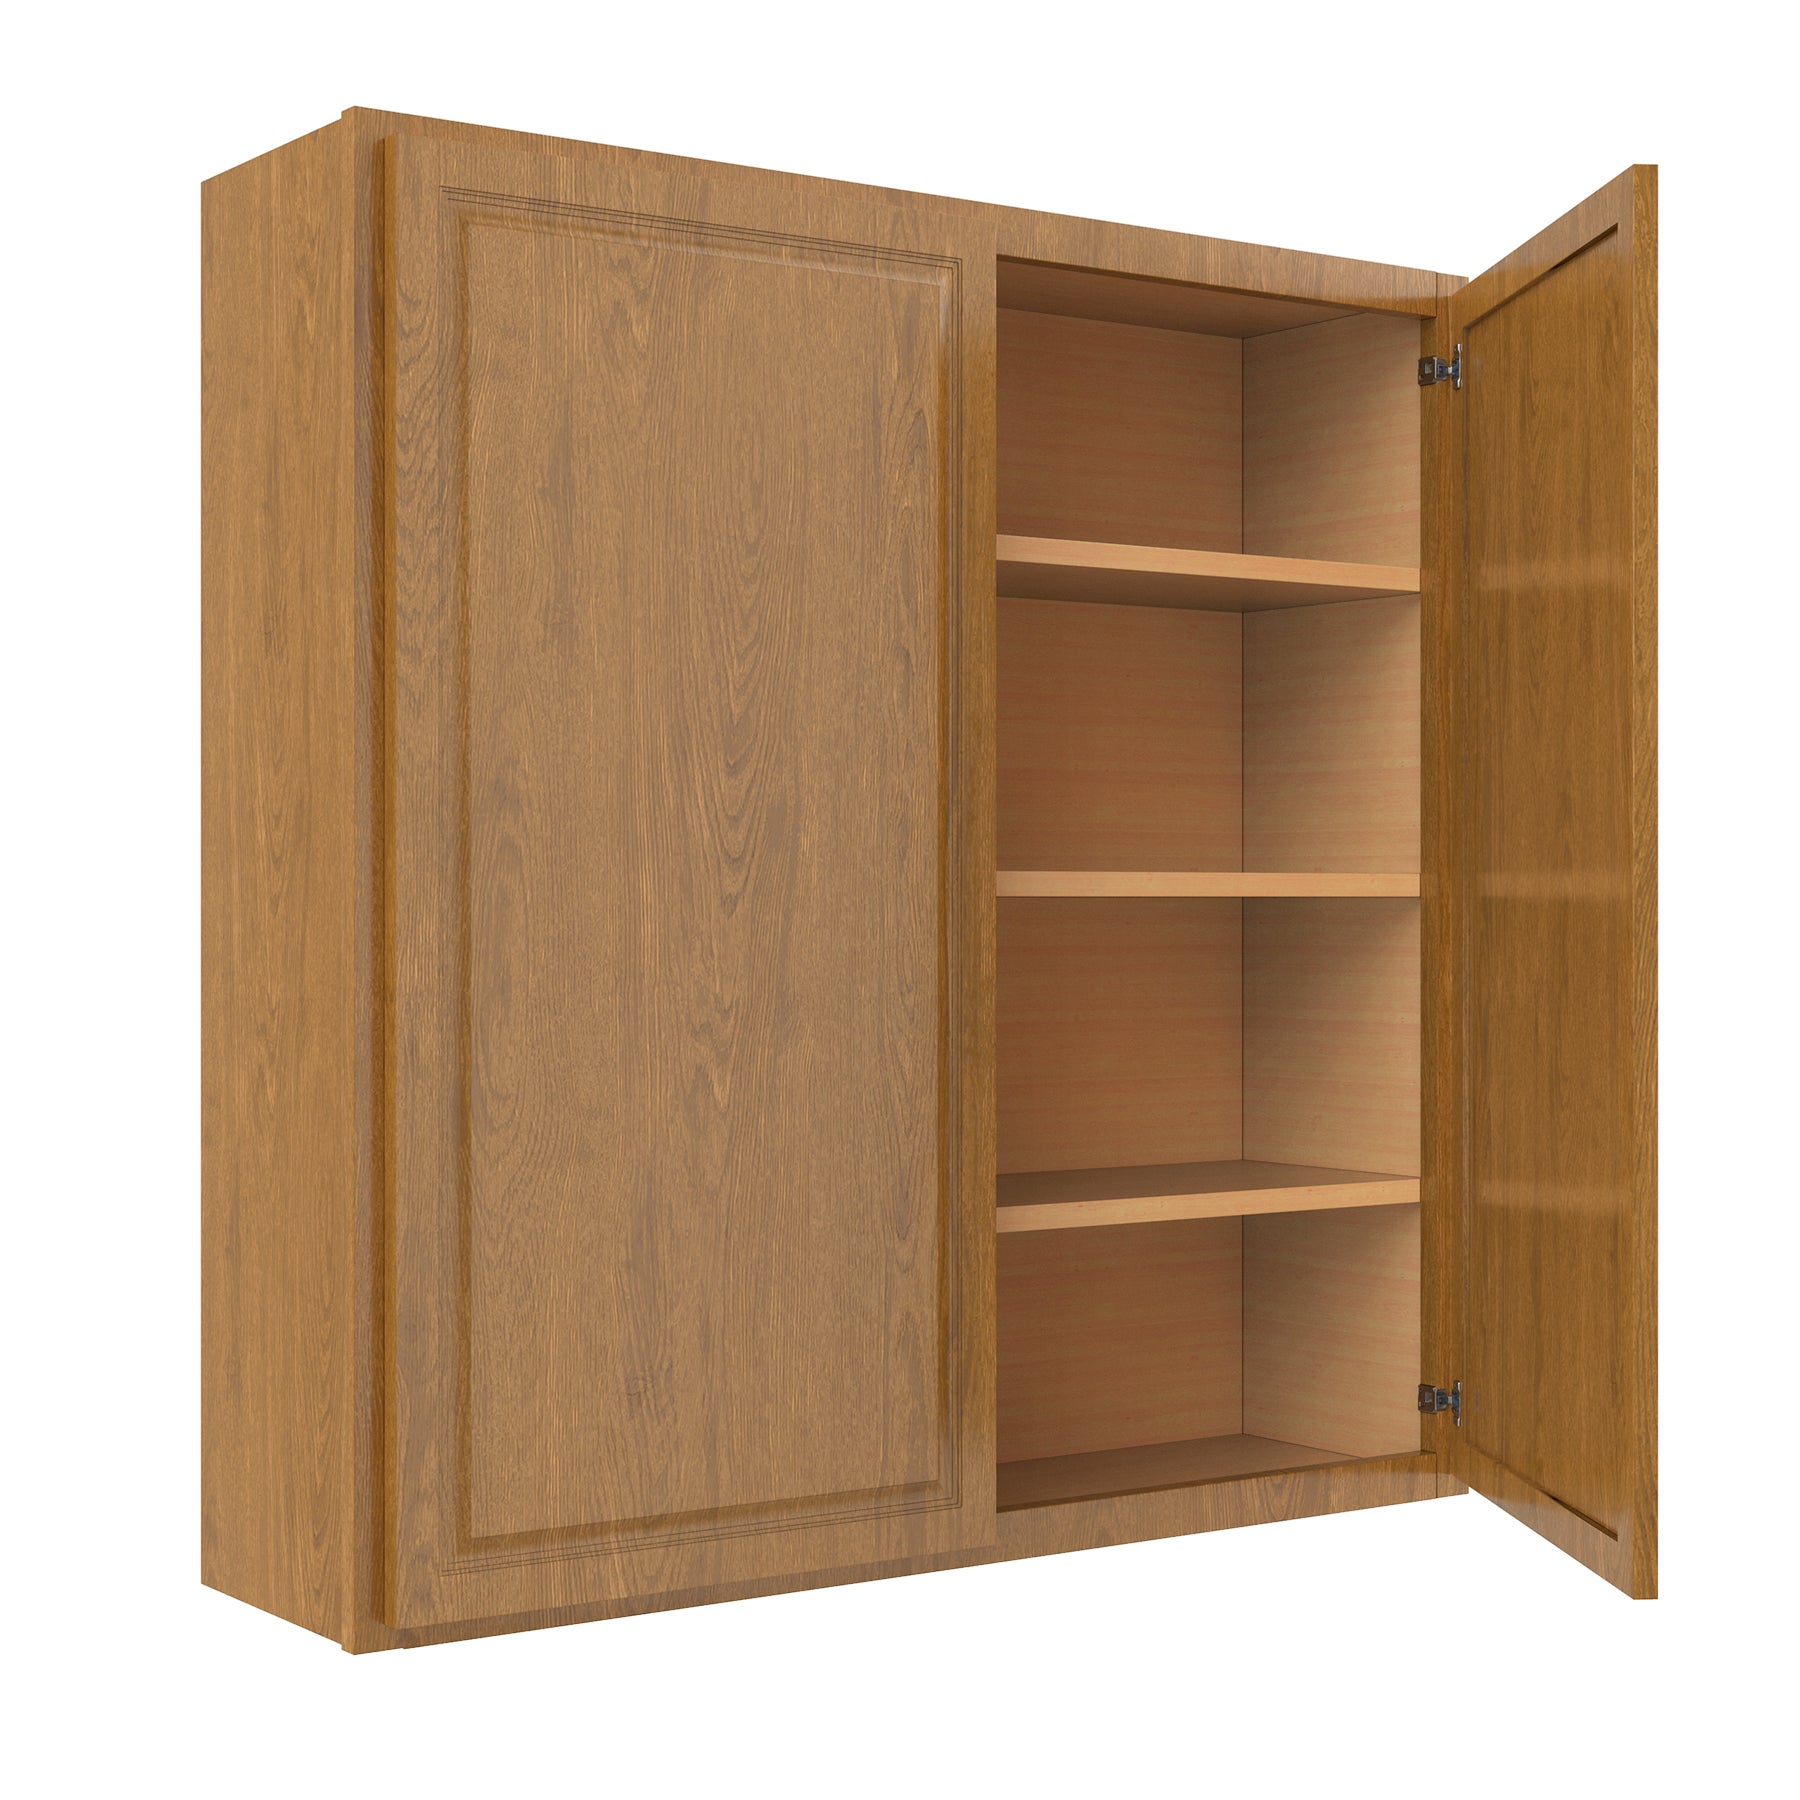 Country Oak 42"W x 42"H Wall Cabinet